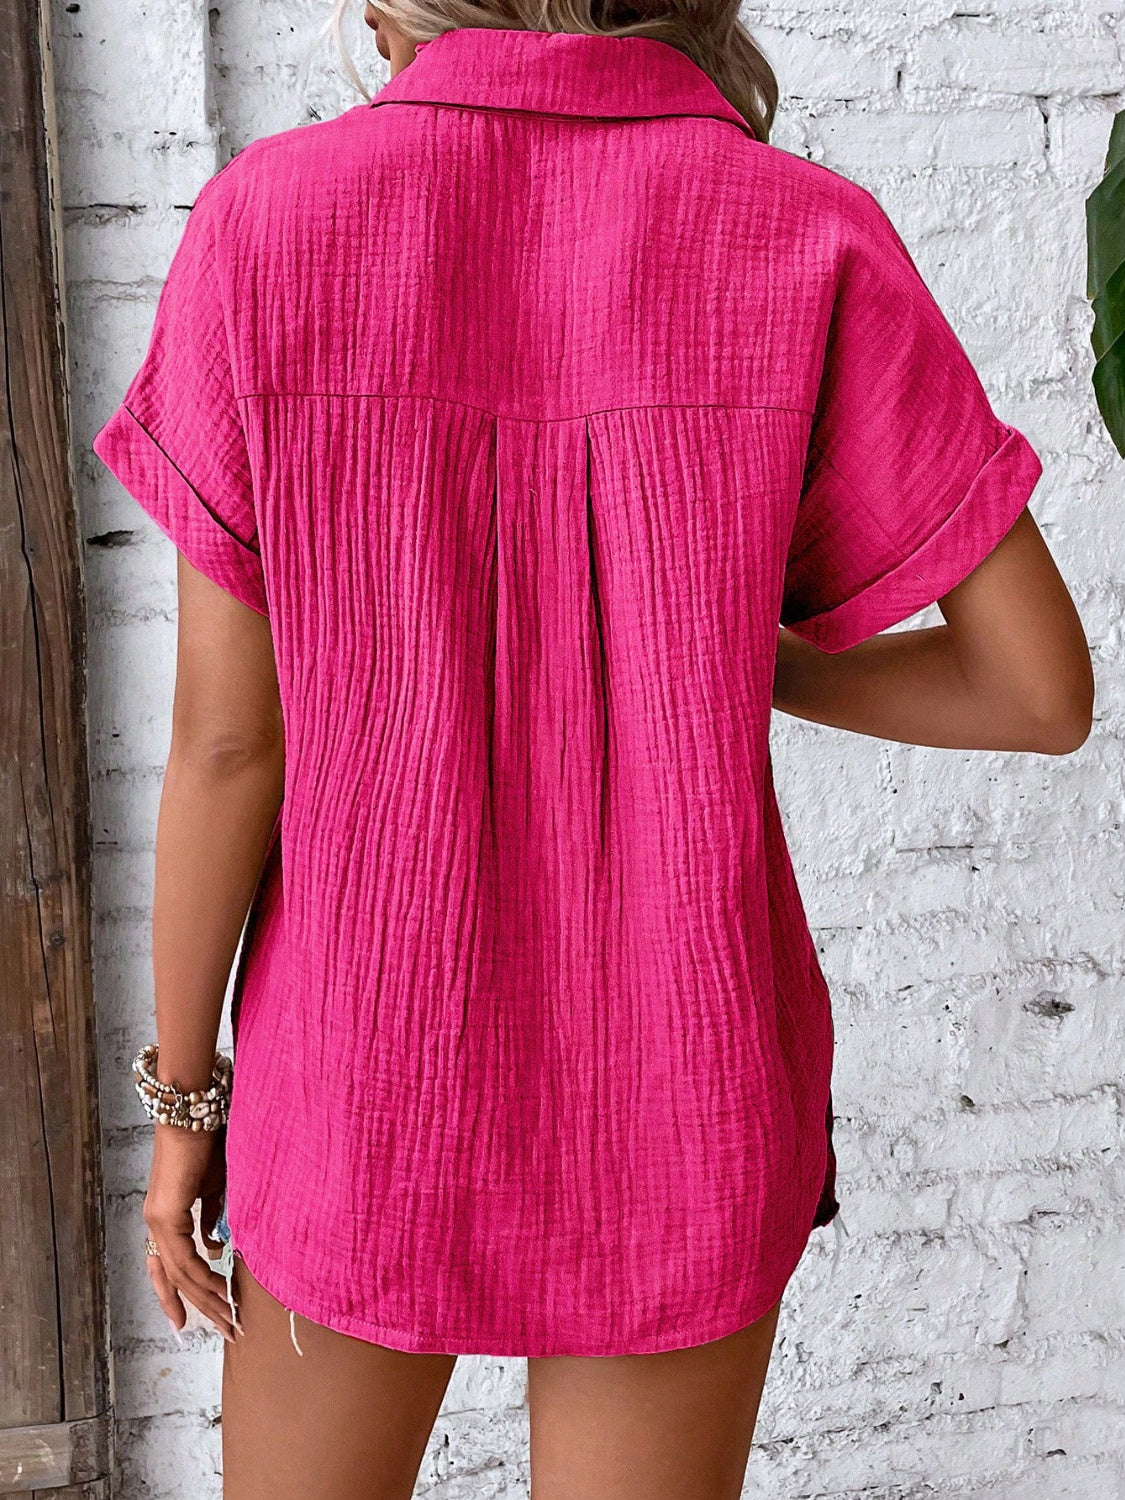 Textured Button Up Short Sleeve Shirt - Simply Polished Boutique